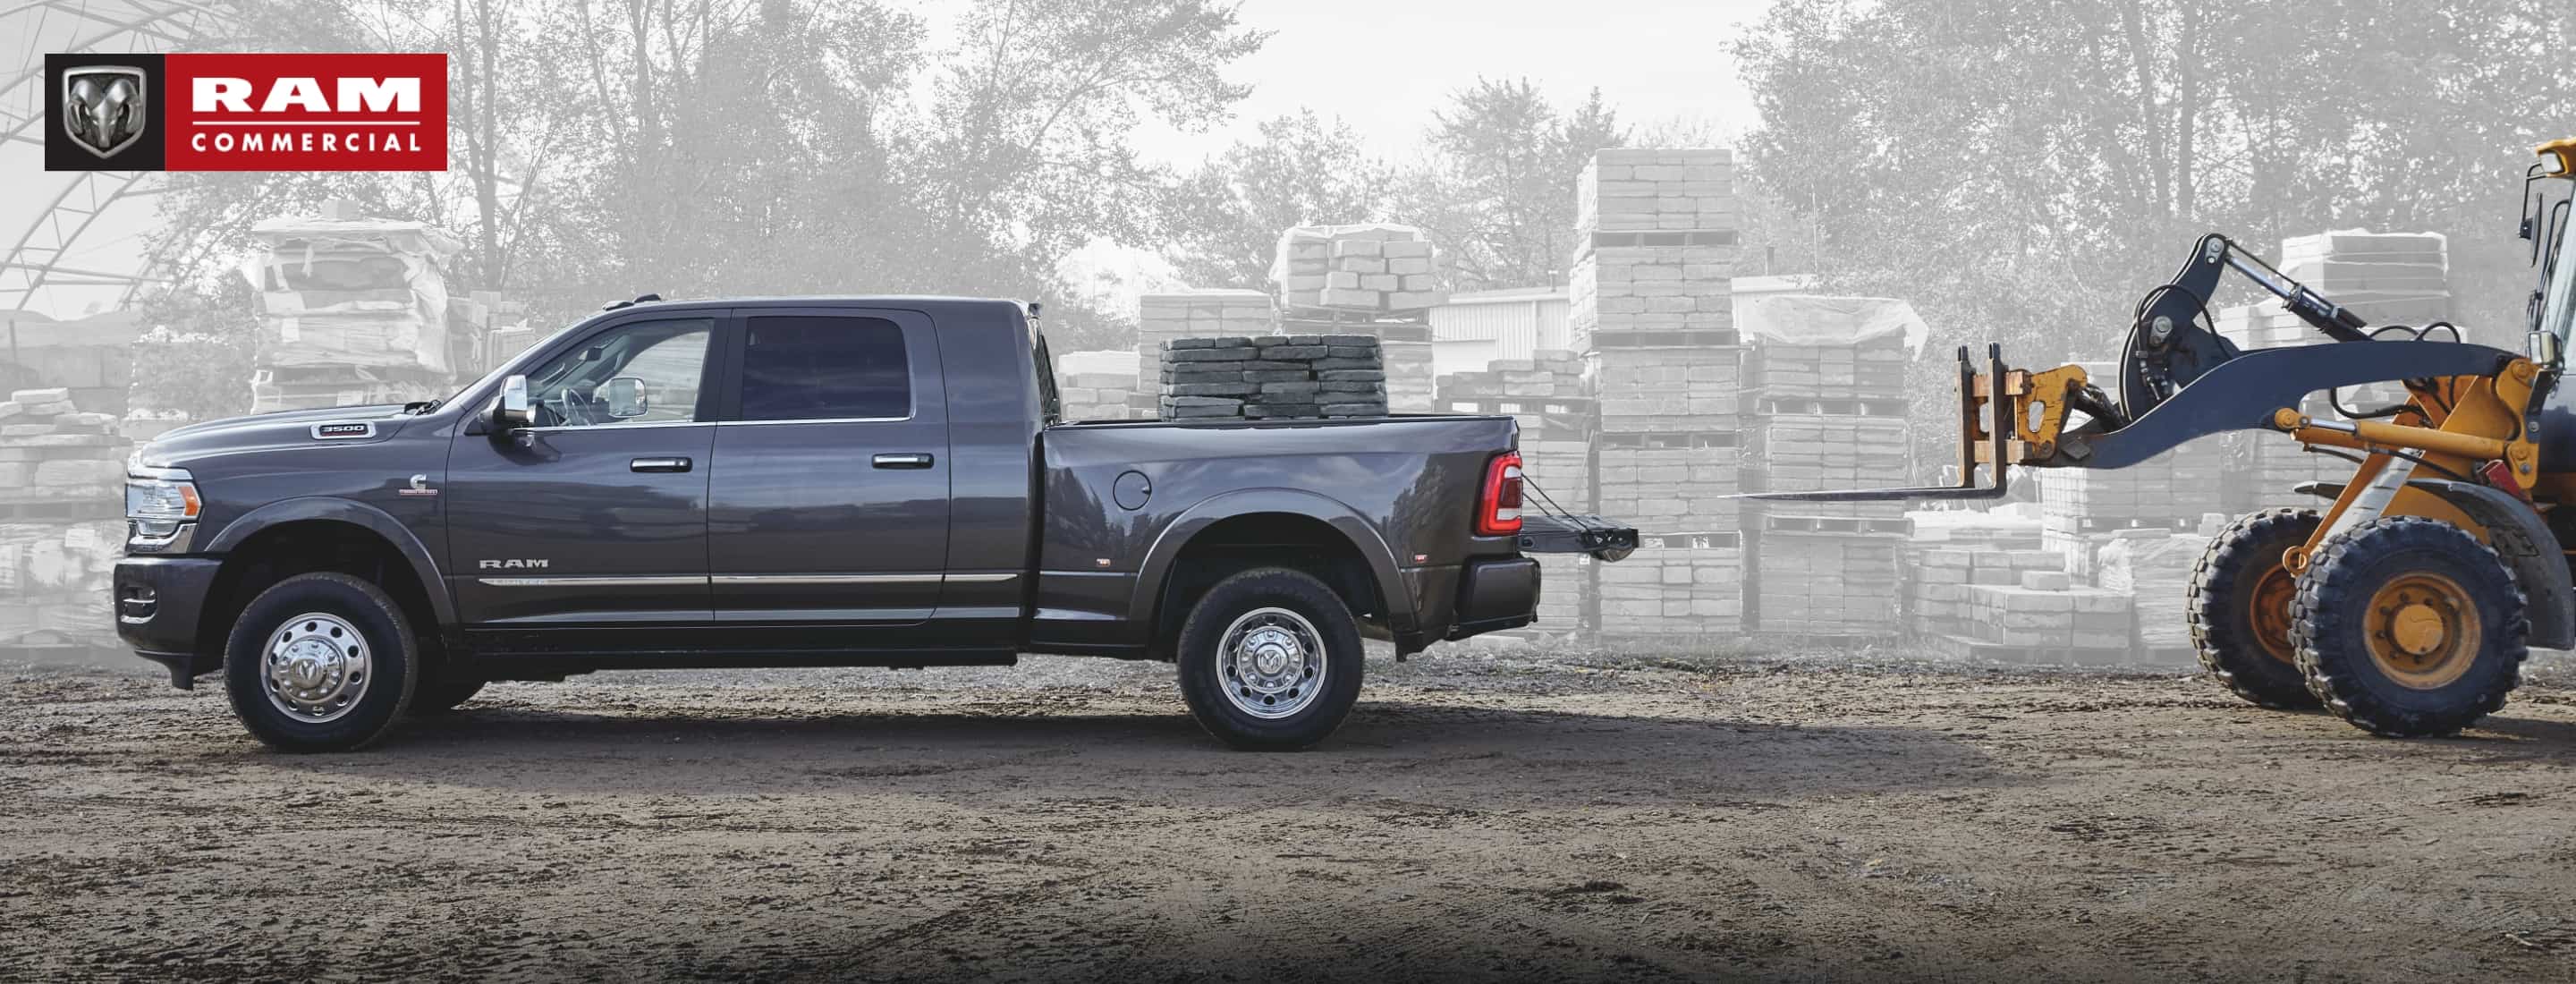 A 2021 Ram 3500 Limited Mega Cab 4x4 with its tailgate open, it's pickup box filled with paving stones that were just loaded in by a forklift. The Ram Commercial logo.